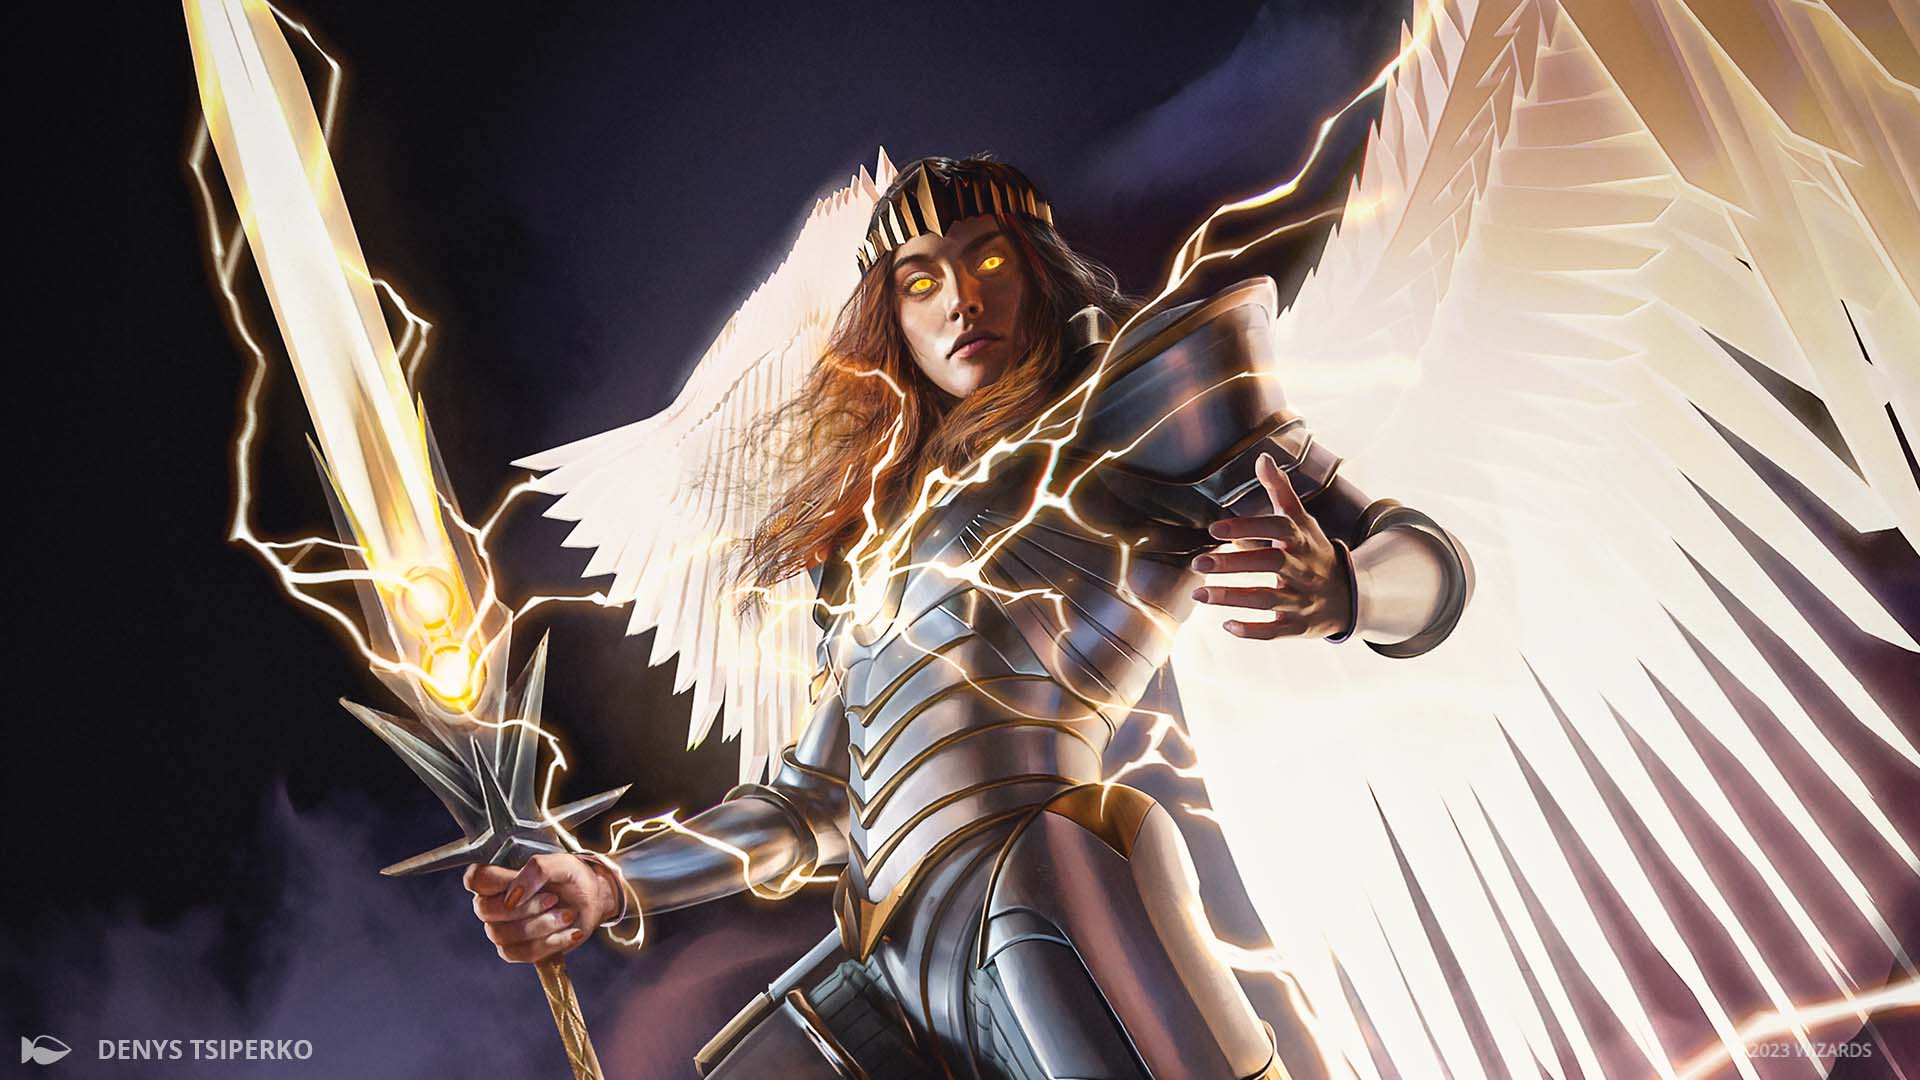 Elspeth Returns As An Archangel In March Of The Machine